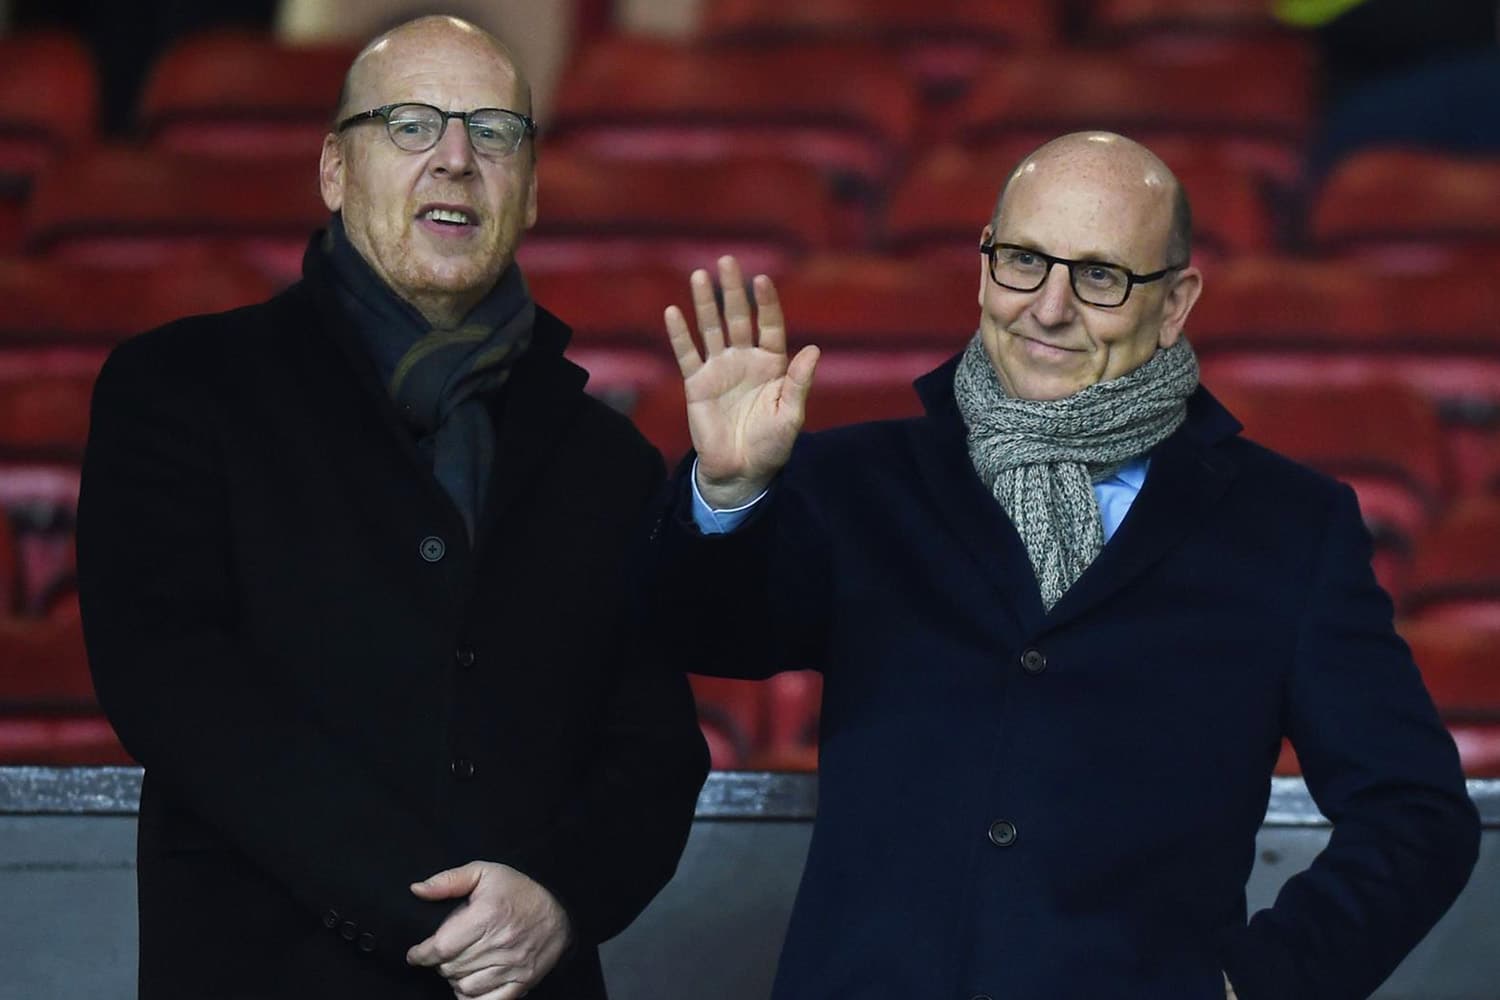 Manchester United owners Joel and Avram Glazer wave to cameras in stands of Old Trafford